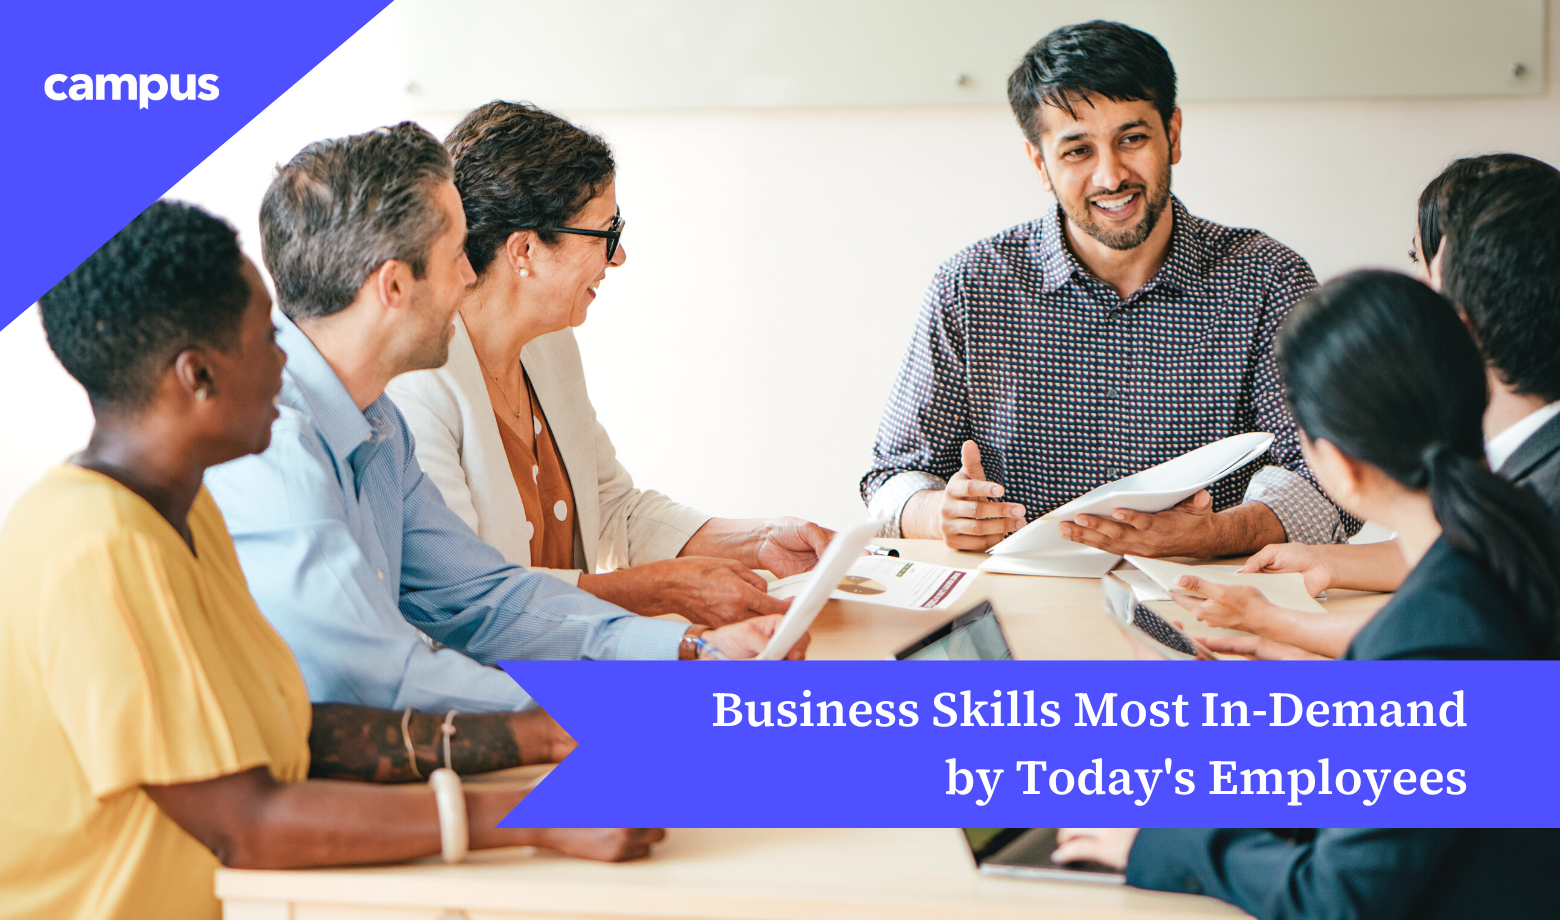 Business Skills Most In-Demand by Today’s Employers